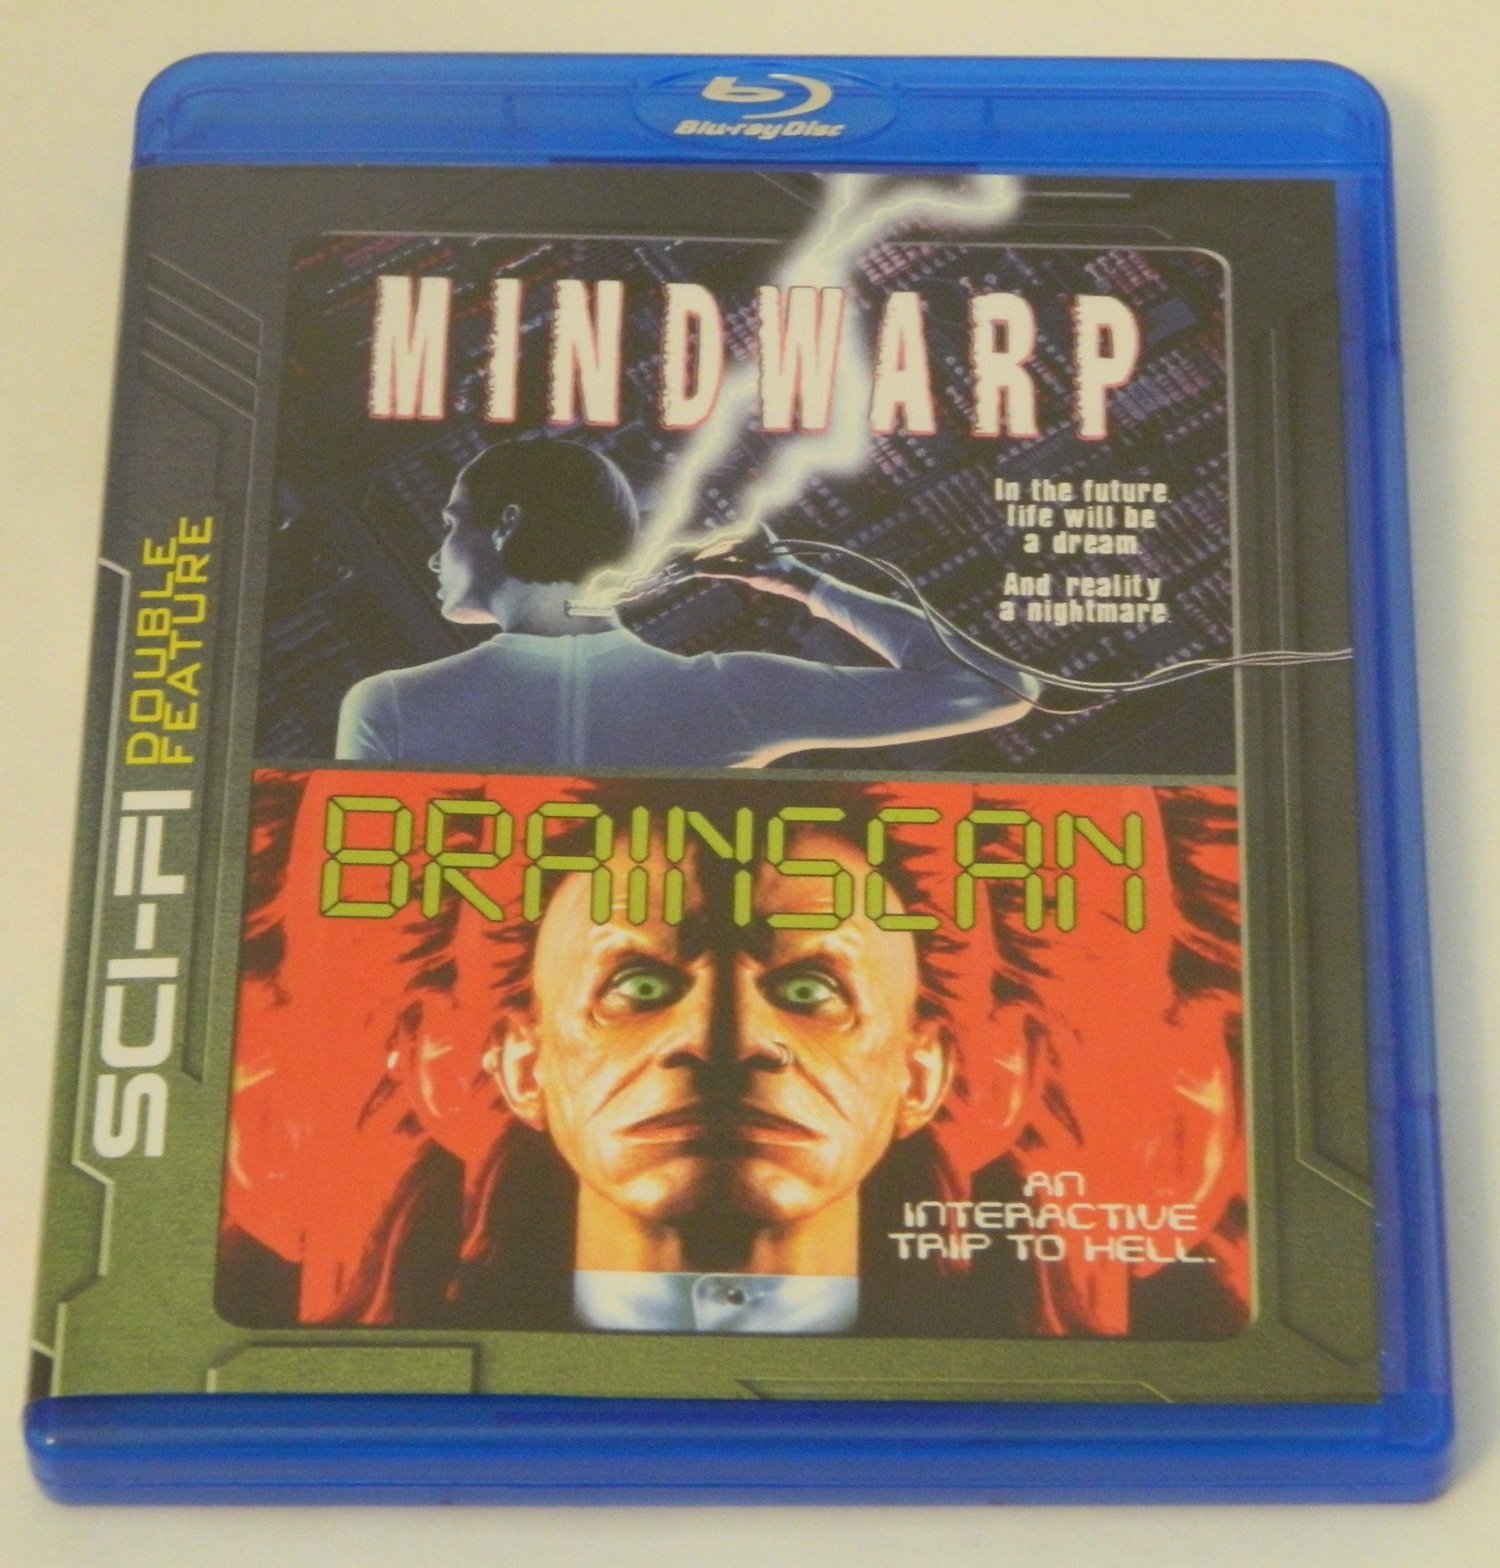 Mindwarp and Brainscan: Sci-Fi Double Feature Blu-ray Review